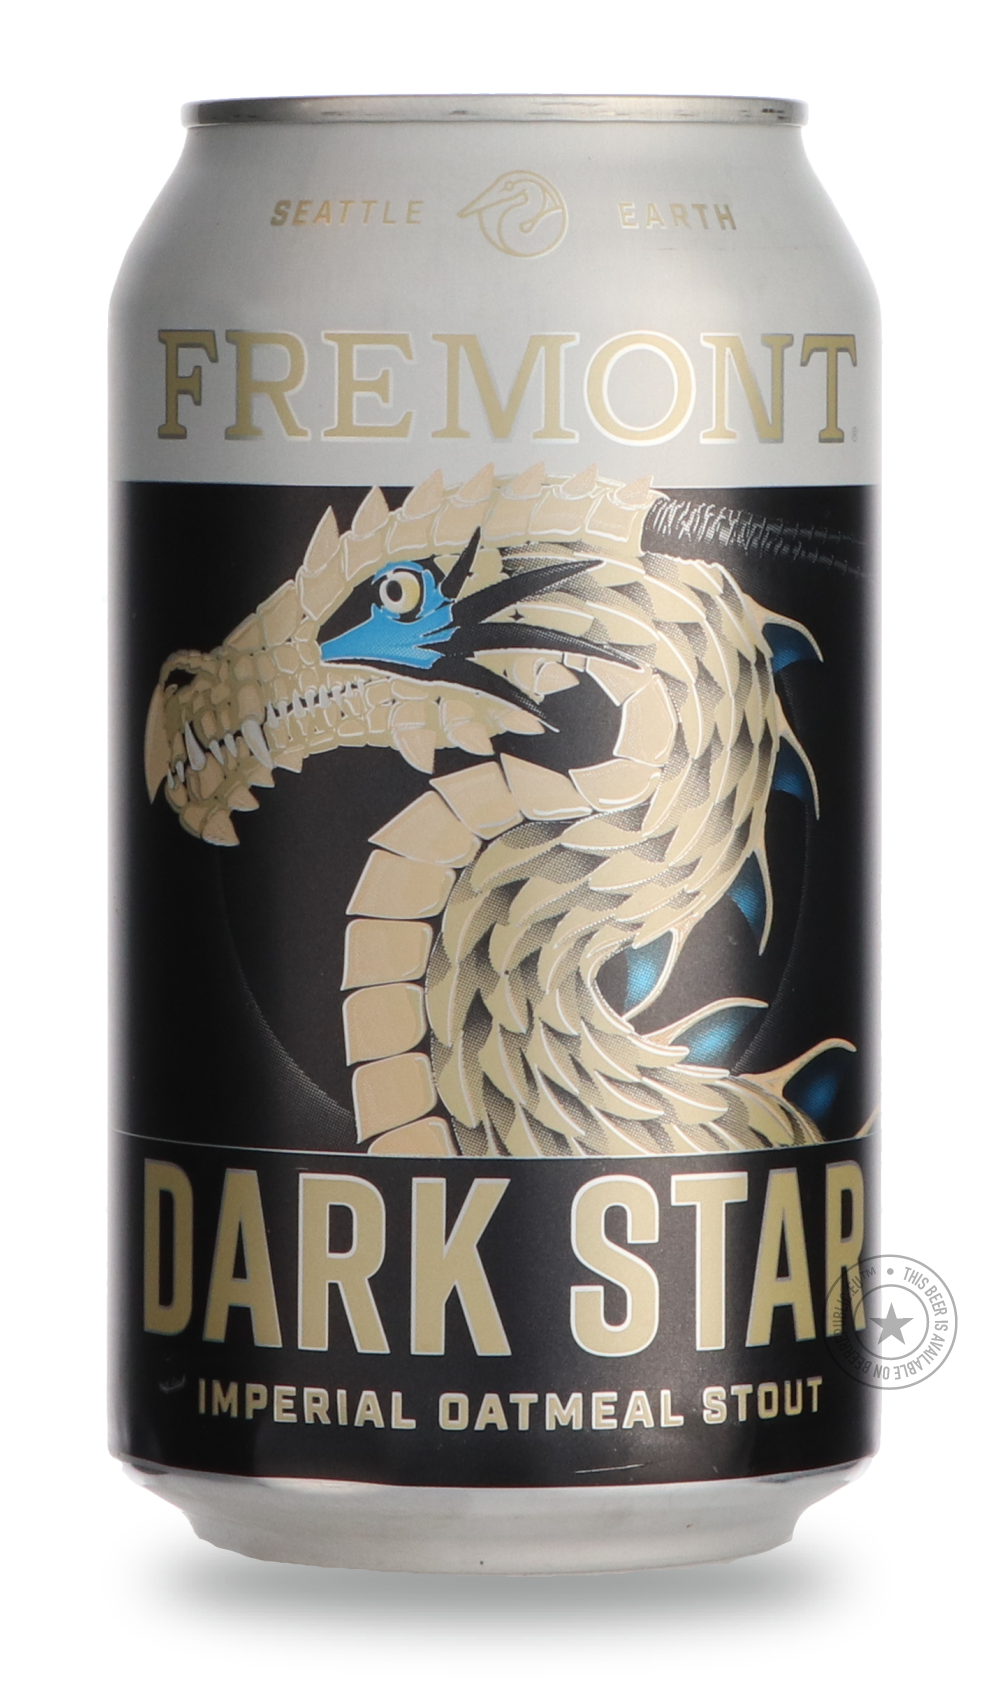 -Fremont- Dark Star-Stout & Porter- Only @ Beer Republic - The best online beer store for American & Canadian craft beer - Buy beer online from the USA and Canada - Bier online kopen - Amerikaans bier kopen - Craft beer store - Craft beer kopen - Amerikanisch bier kaufen - Bier online kaufen - Acheter biere online - IPA - Stout - Porter - New England IPA - Hazy IPA - Imperial Stout - Barrel Aged - Barrel Aged Imperial Stout - Brown - Dark beer - Blond - Blonde - Pilsner - Lager - Wheat - Weizen - Amber - Ba